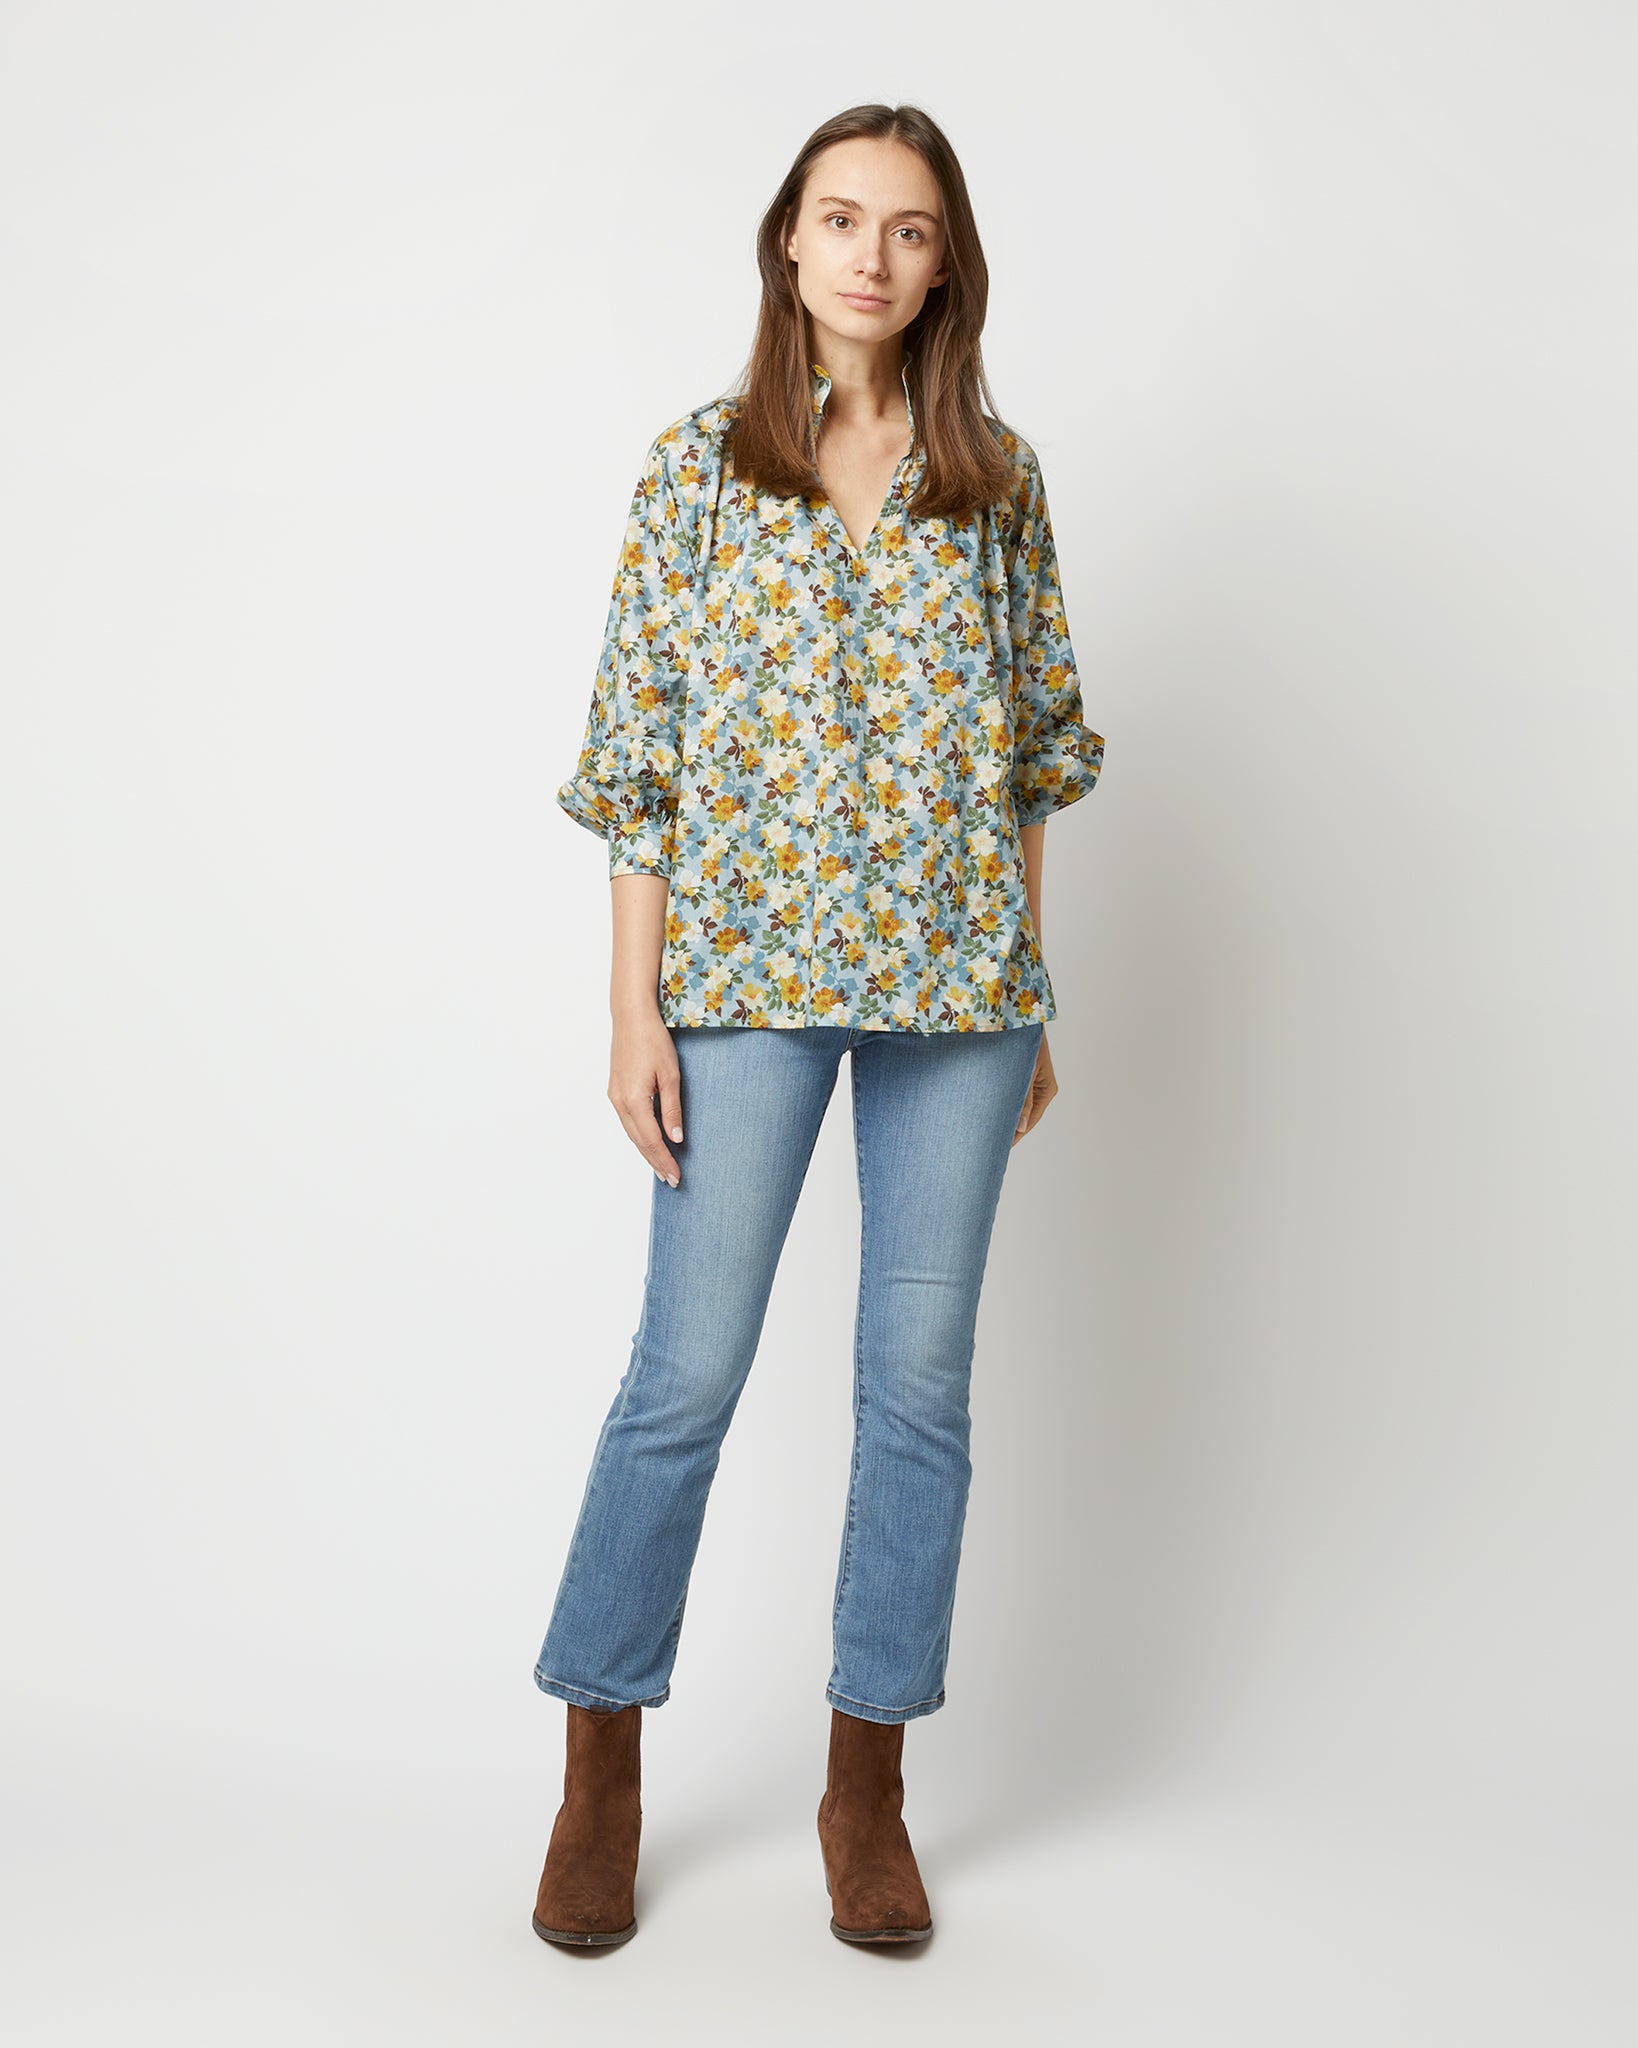 Long-Sleeved Maeve Smocking Top in Blue/Gold Nysa Liberty Fabric